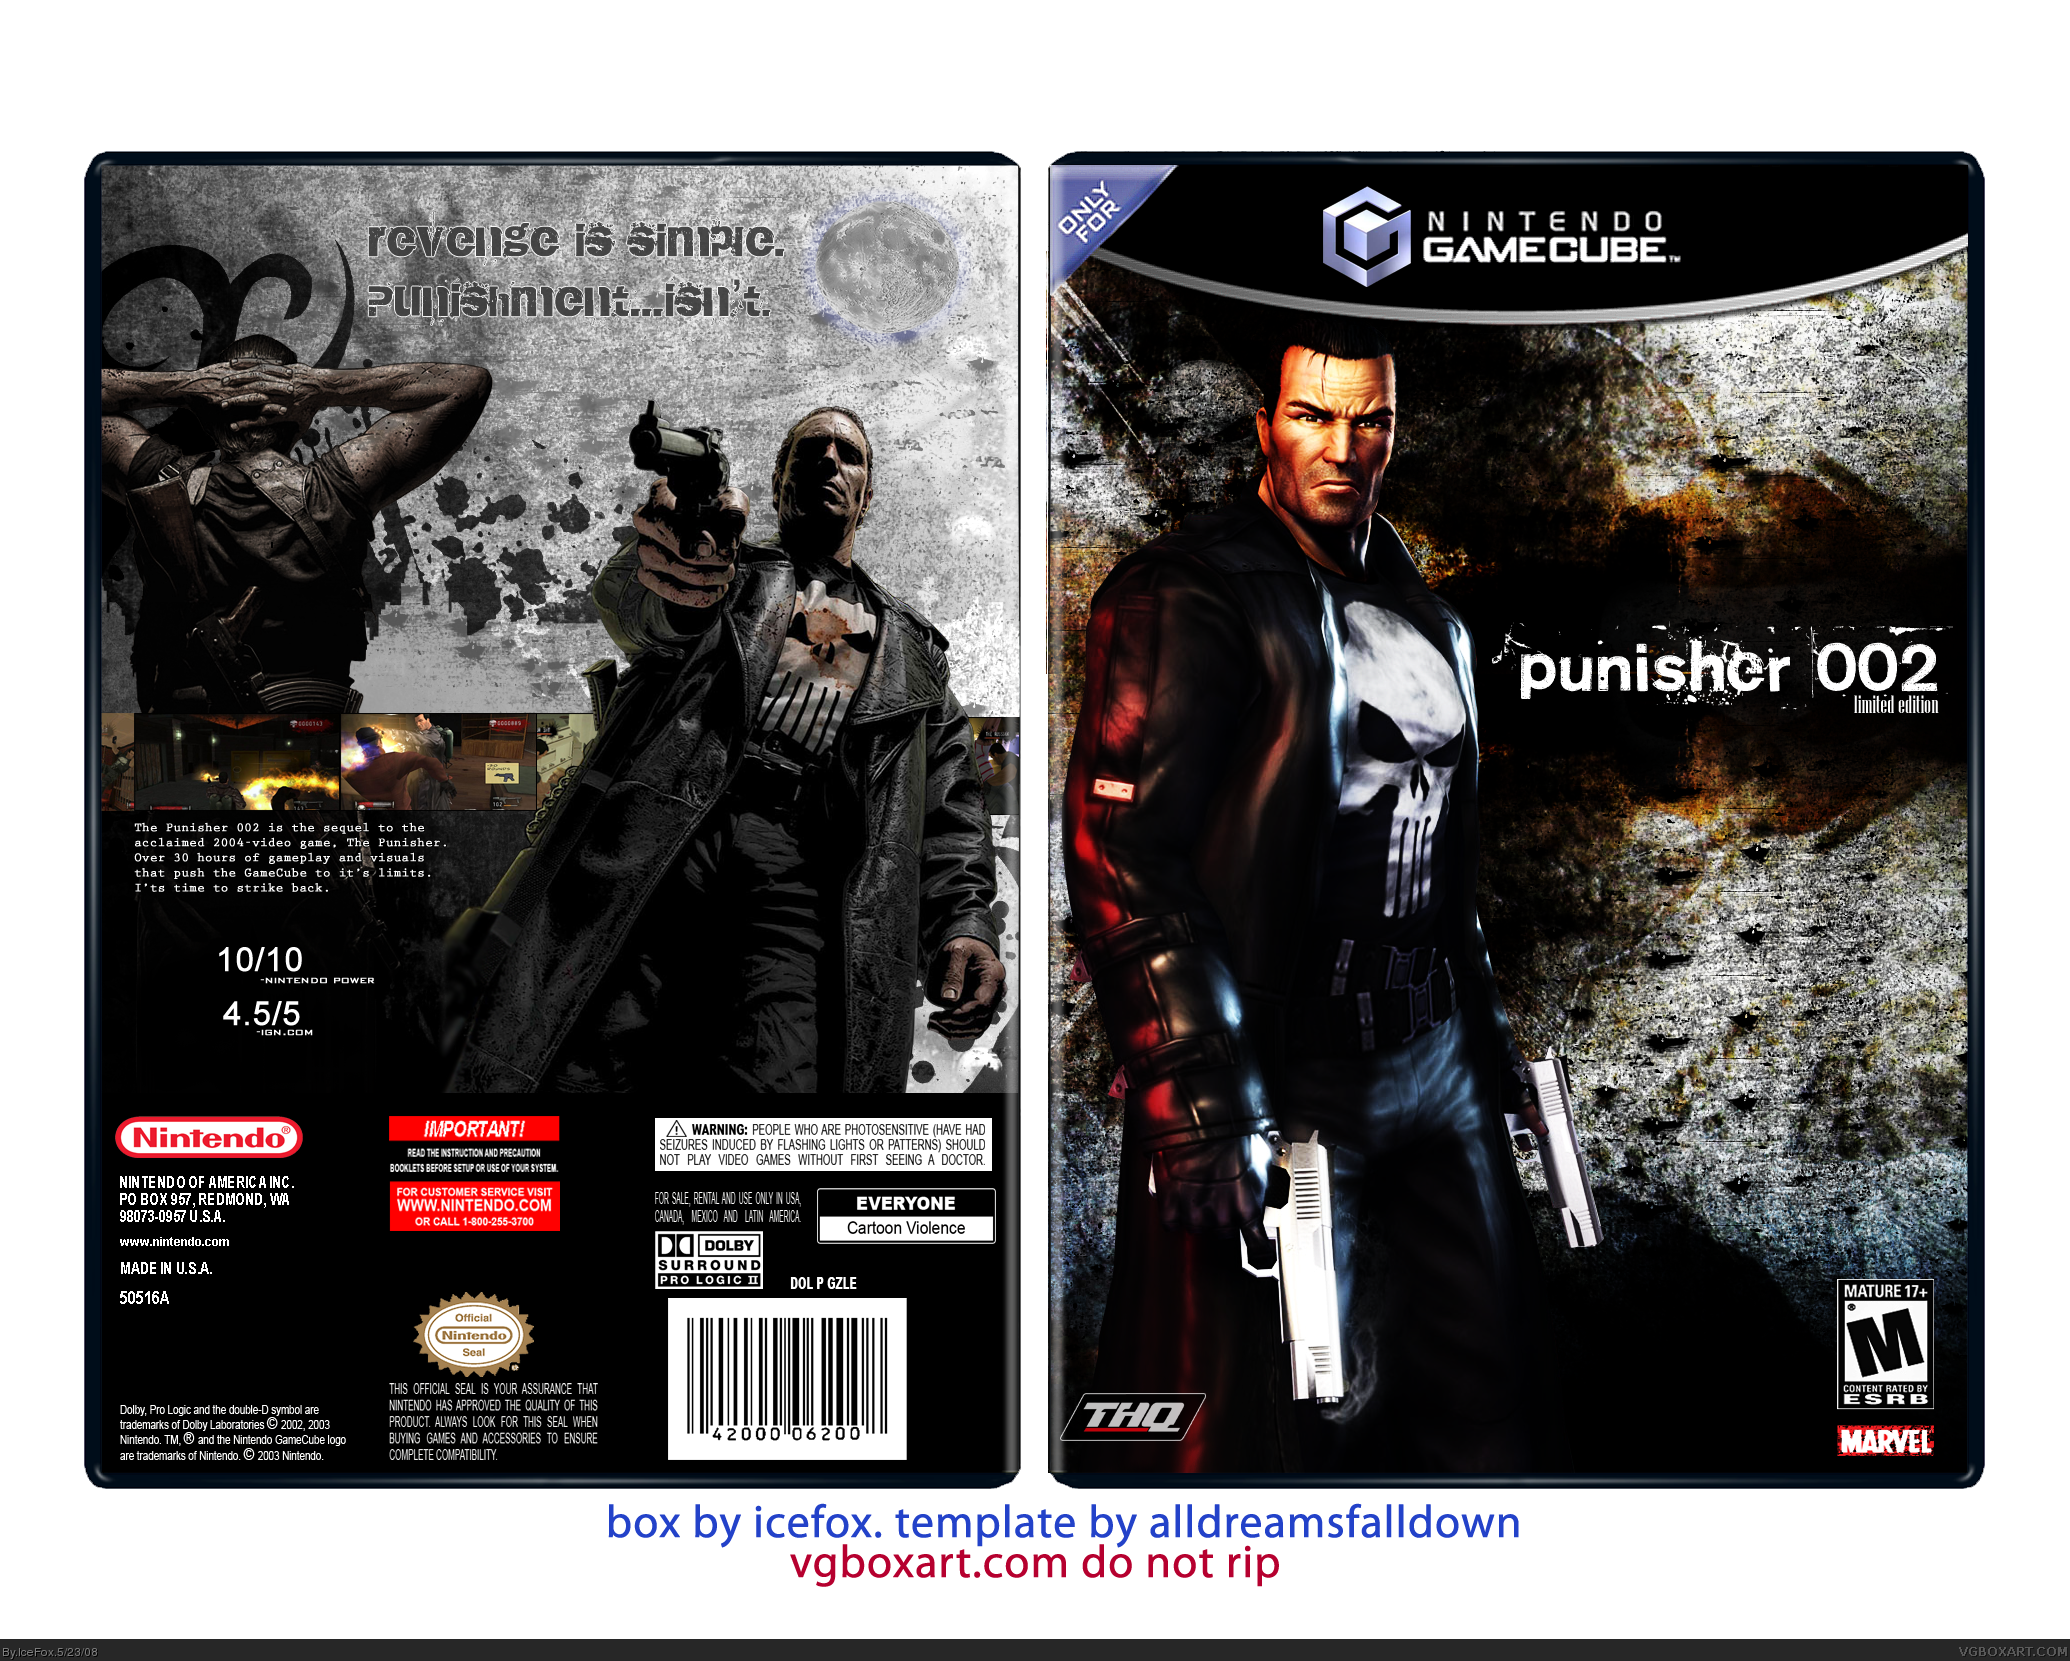 The Punisher 2 box cover